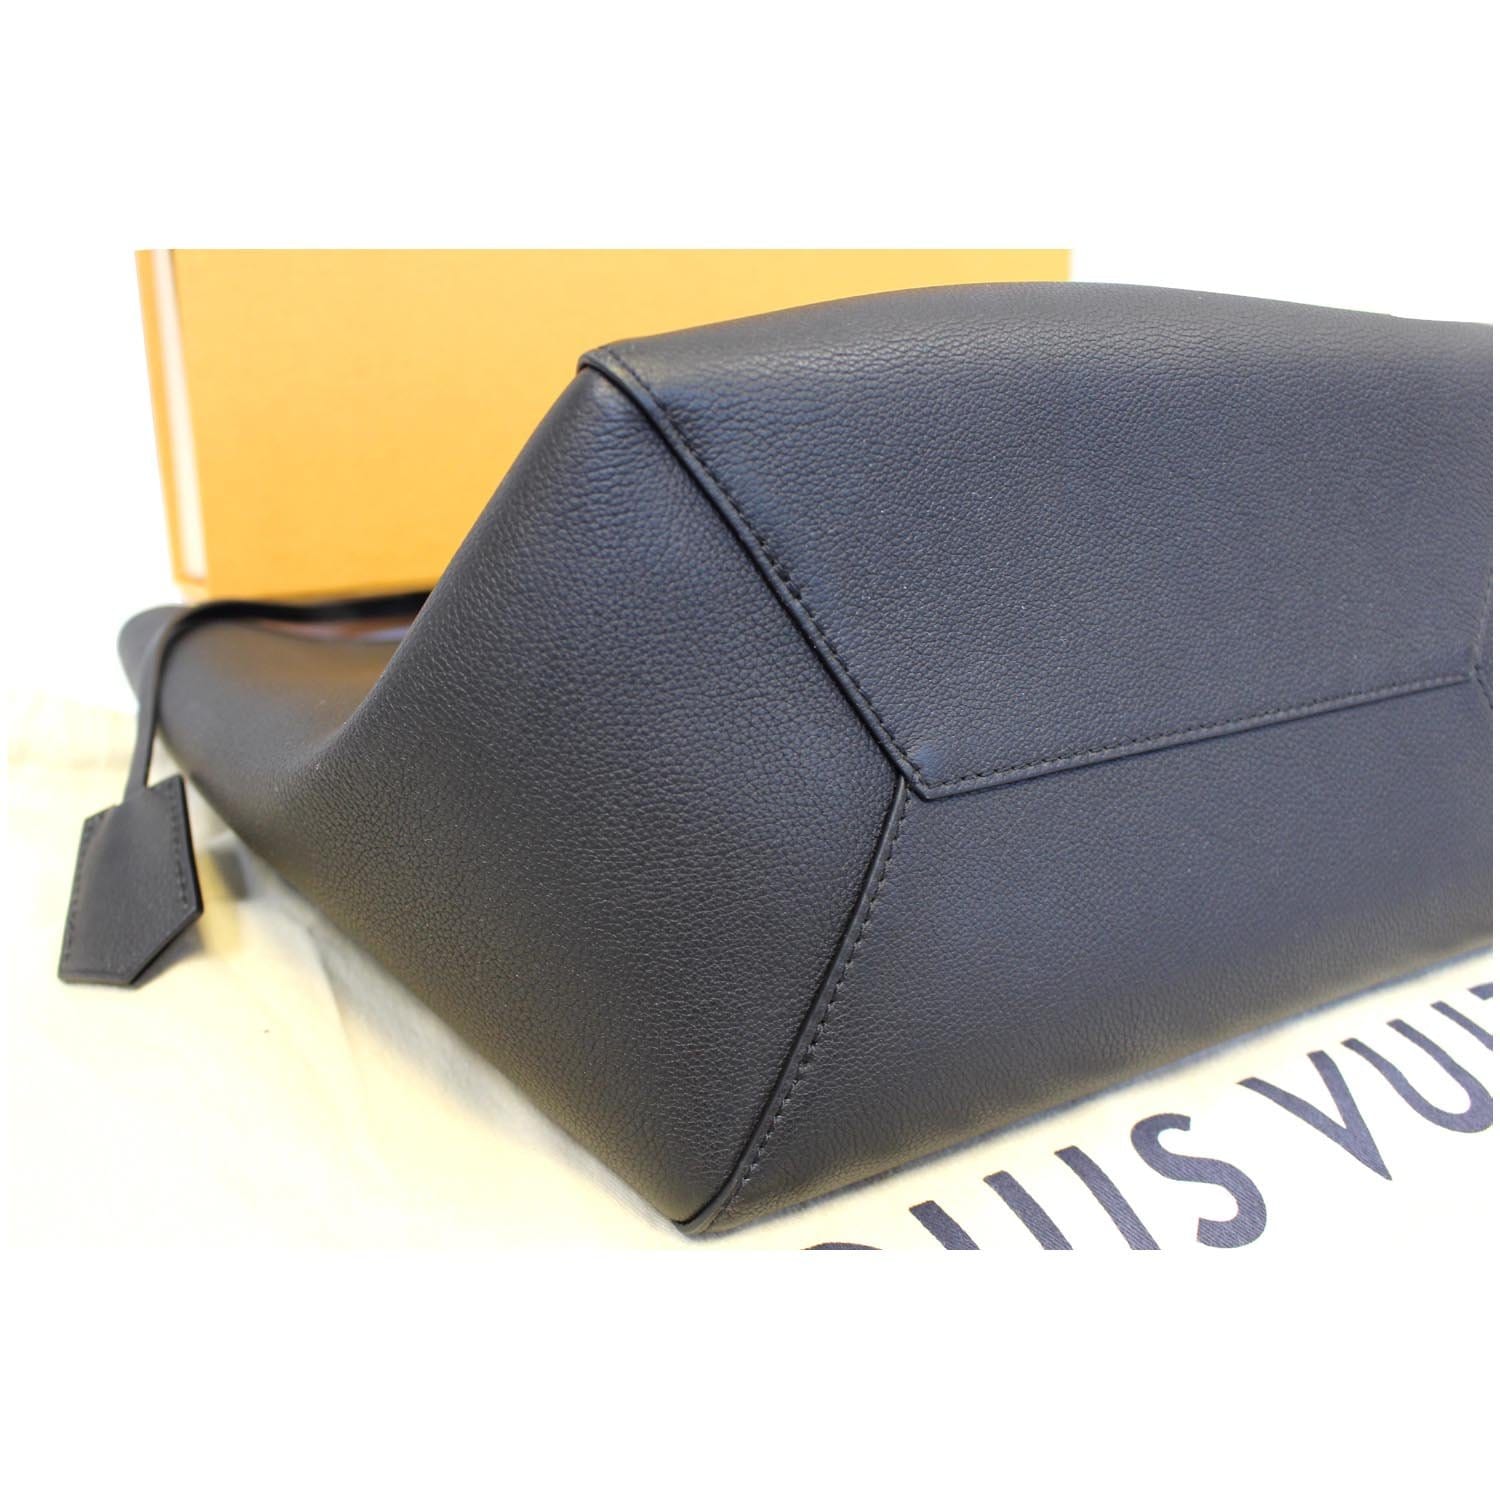 Lockme leather clutch bag Louis Vuitton Black in Leather - 29859080